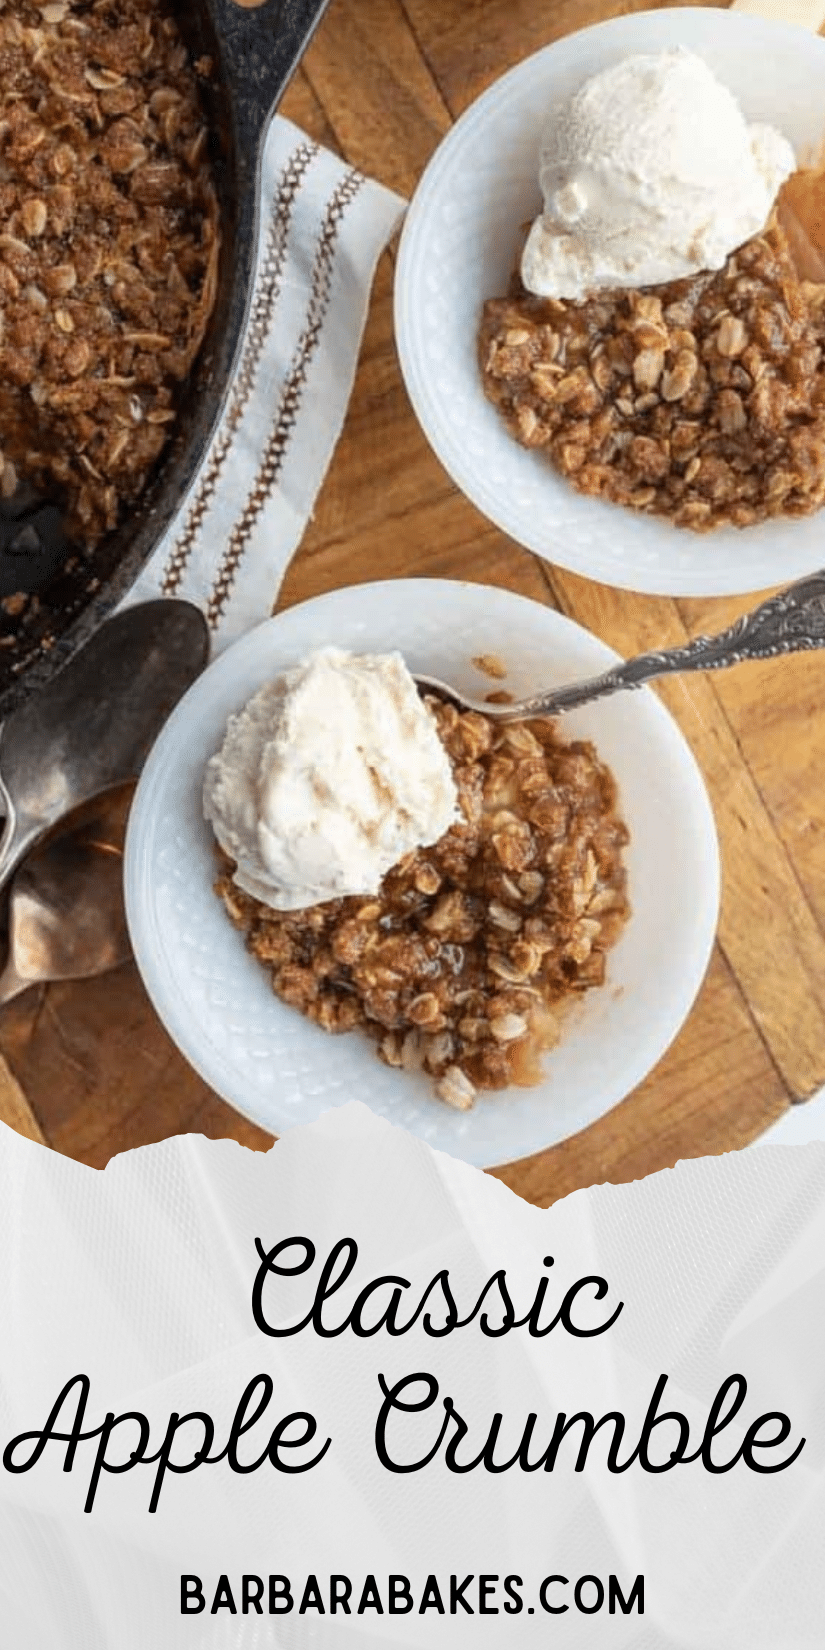 A hot homemade Apple Crisp is the perfect easy dessert, especially topped with a rich creamy vanilla ice cream. Easy to make and delicious! via @barbarabakes